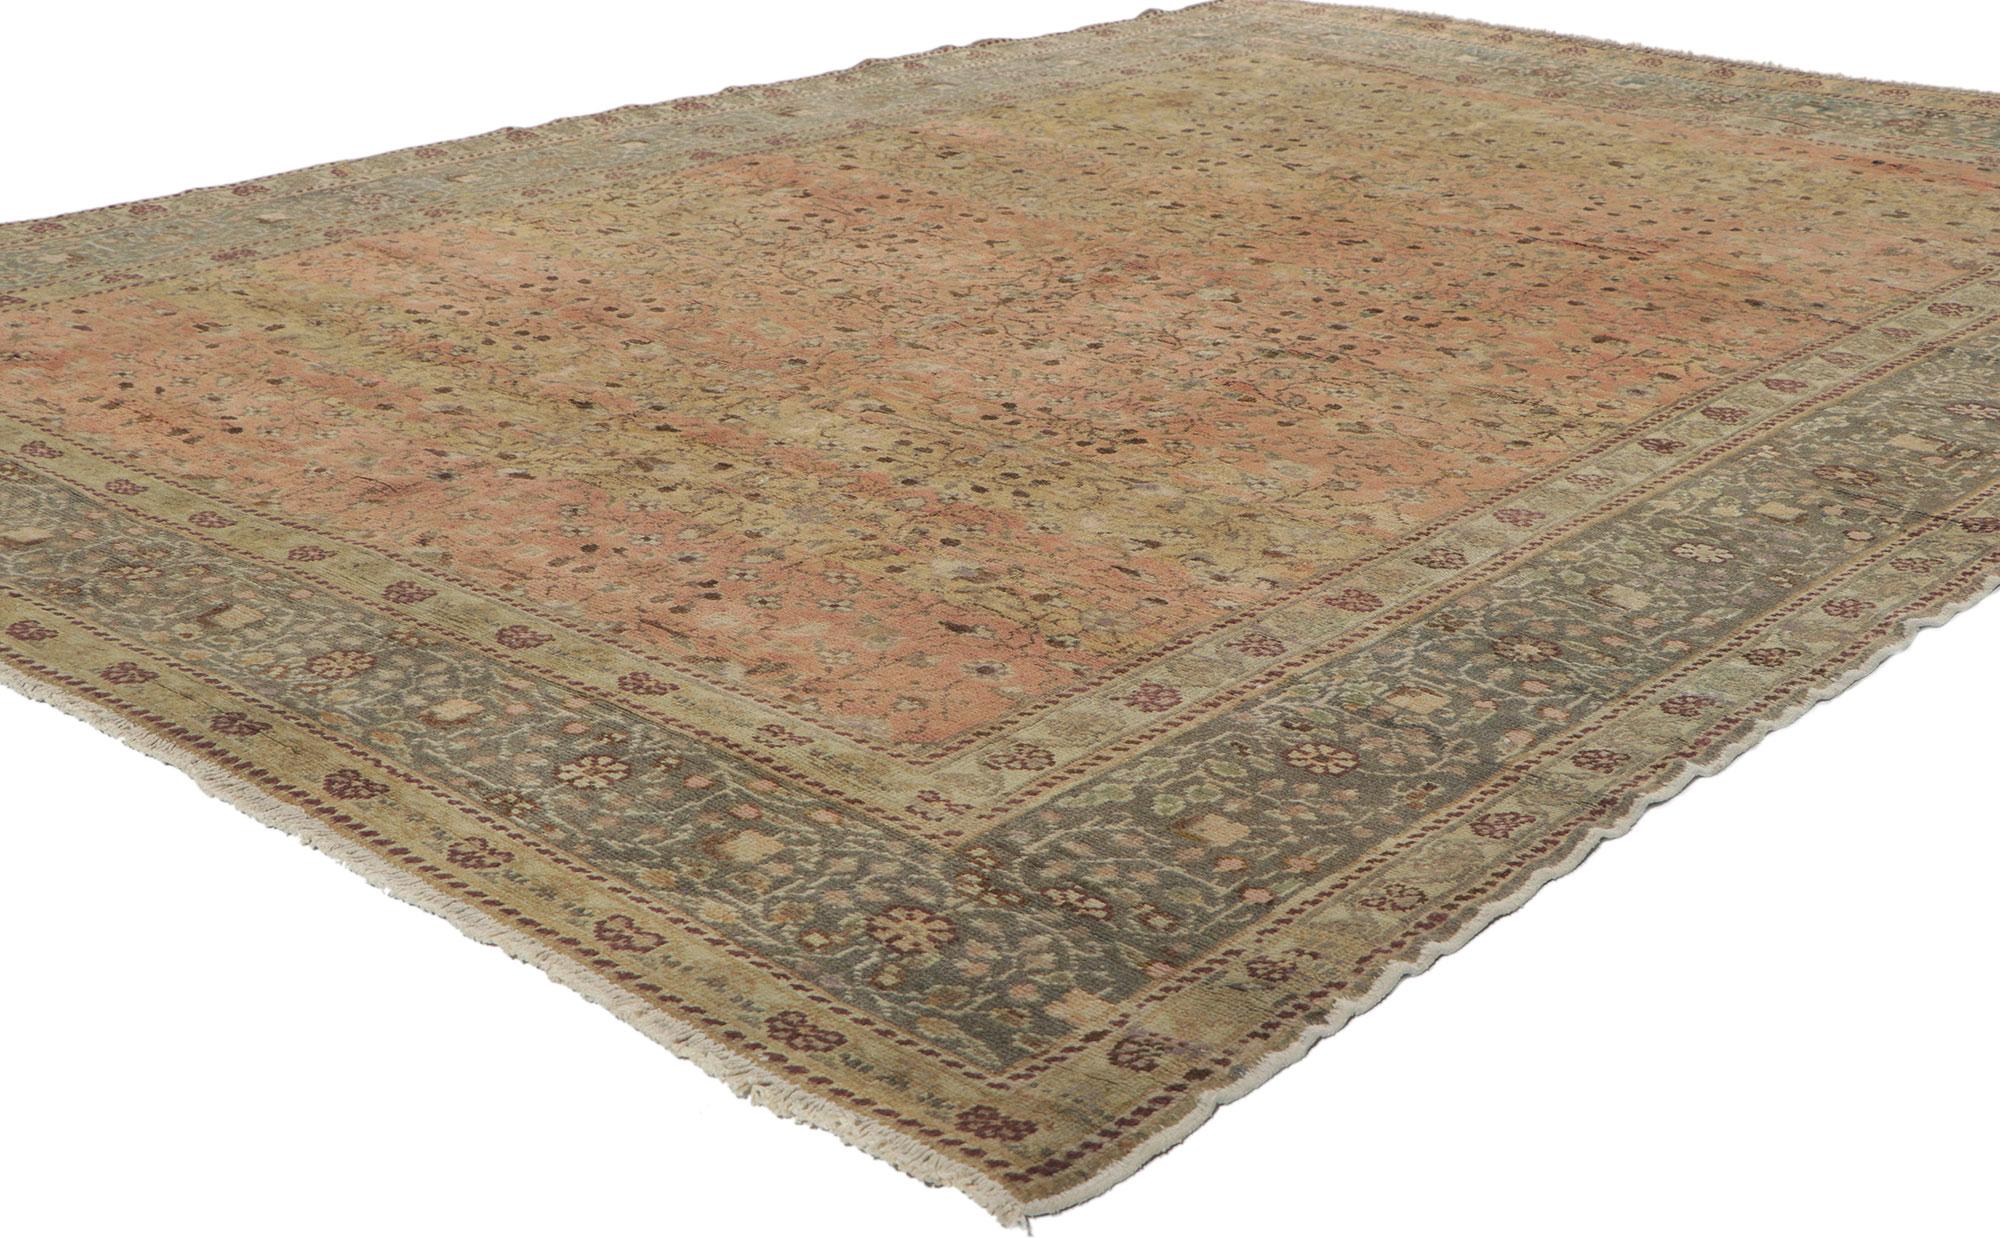 50414 Distressed Antique Turkish Sivas Rug with Shabby Chic Farmhouse Style 06'06 x 08'10. ​​This hand knotted wool distressed antique Turkish Sivas rug beautifully highlights a shabby chic farmhouse style. It features an all-over floral lattice